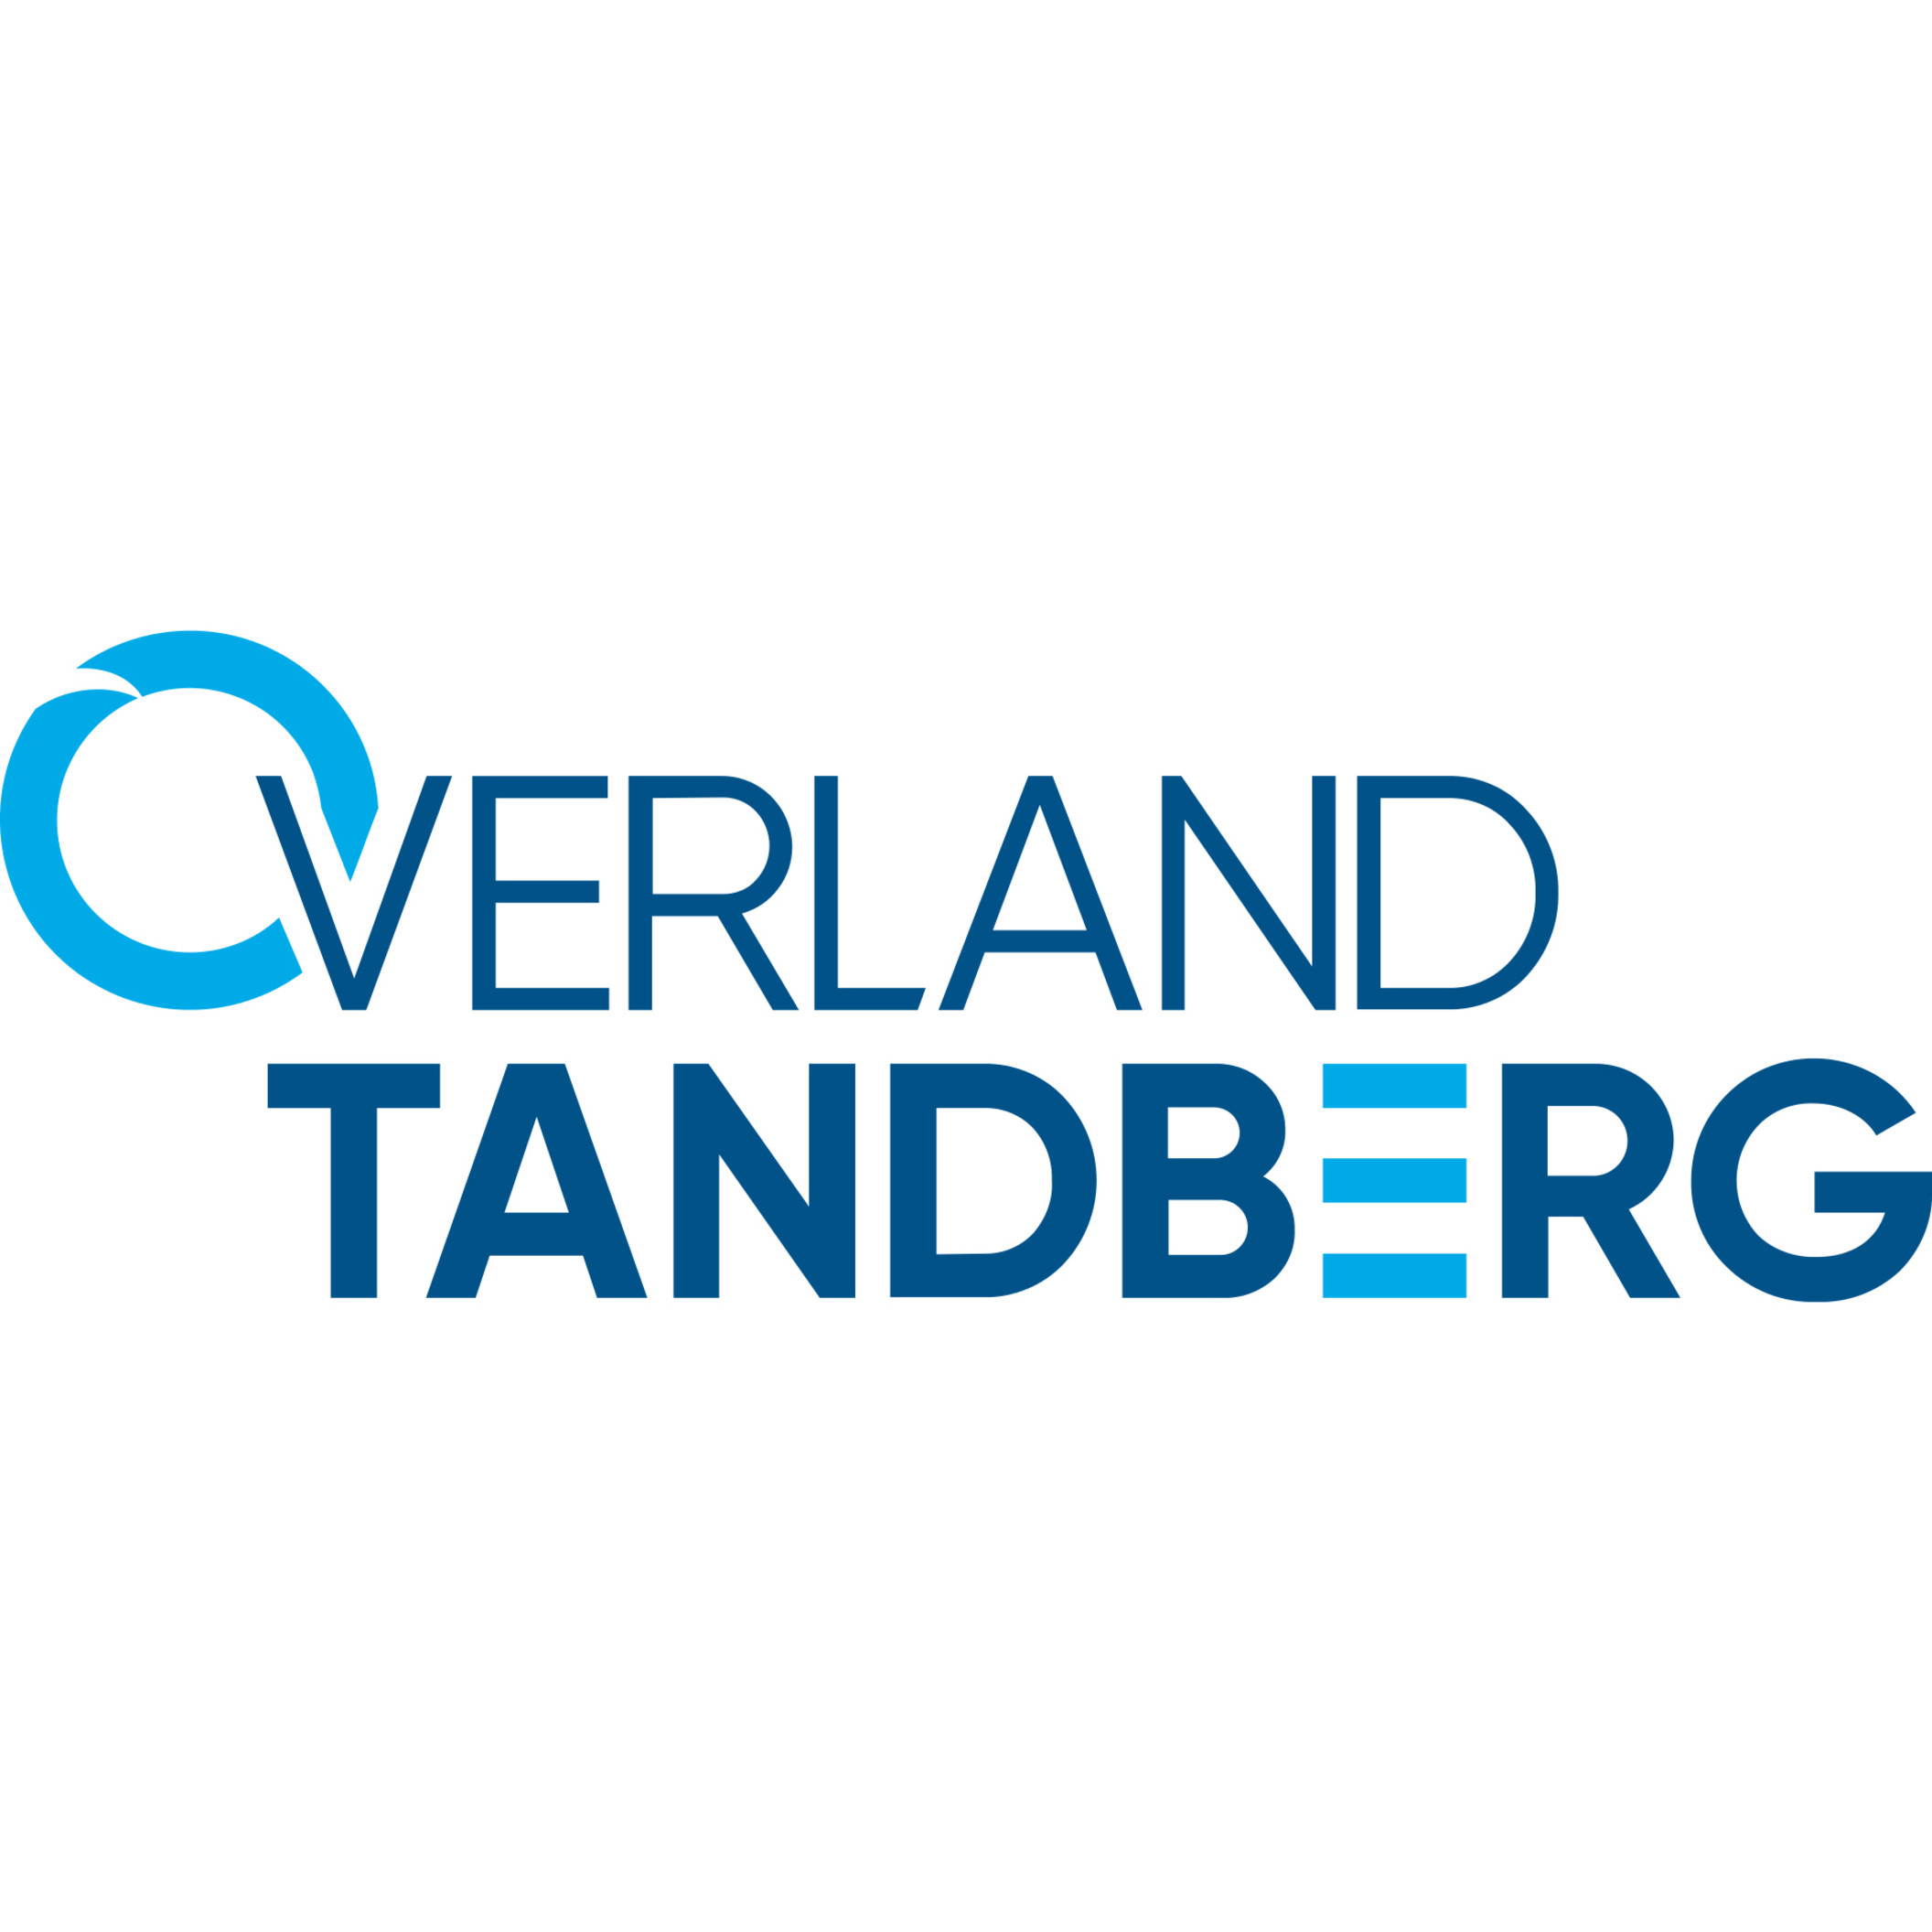 Overland -Tandberg Cleaning CartridgeFor UniversalLabeled20 / Pack 434157